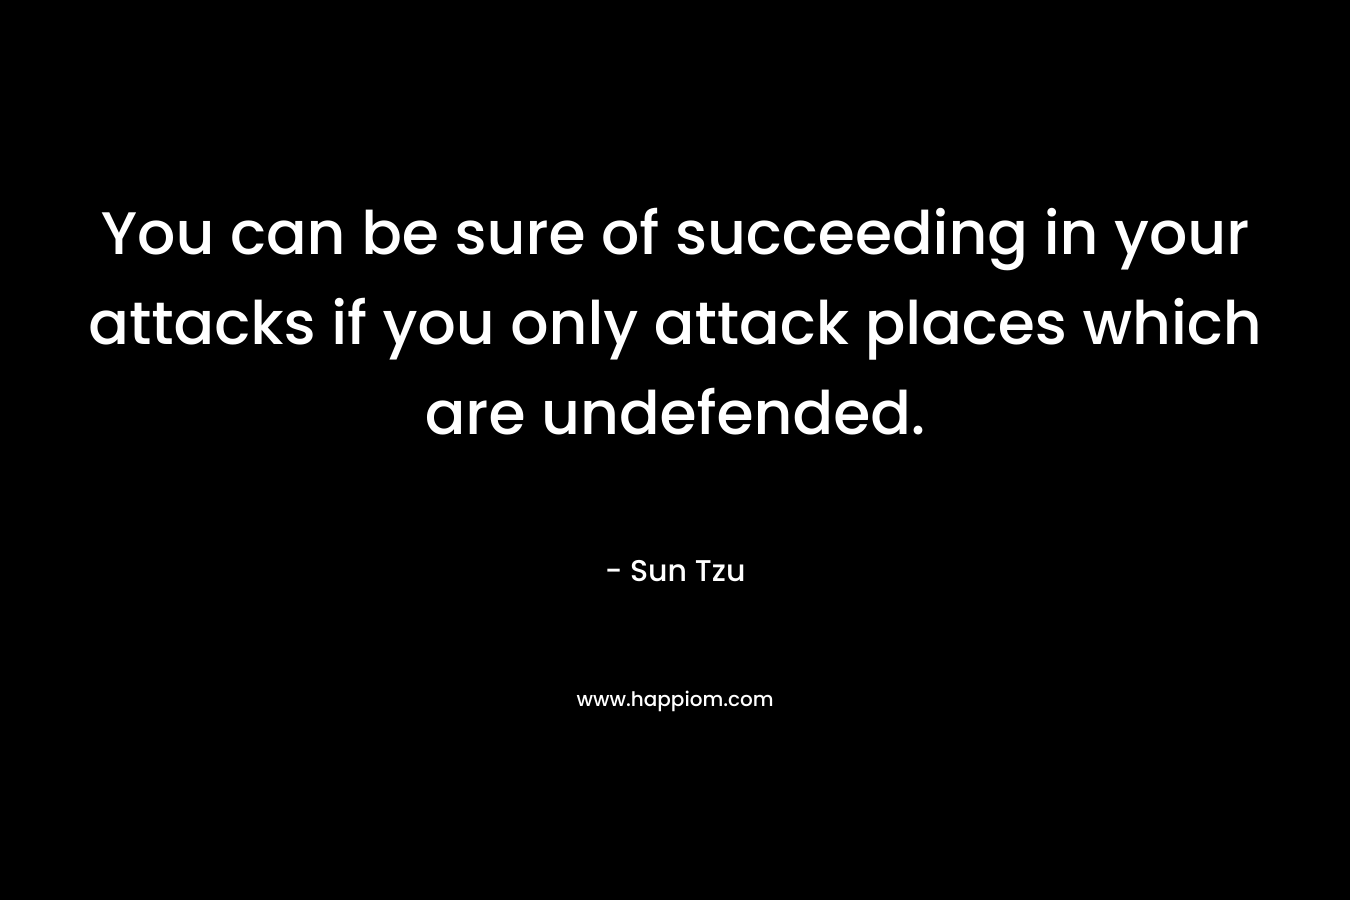 You can be sure of succeeding in your attacks if you only attack places which are undefended. – Sun Tzu